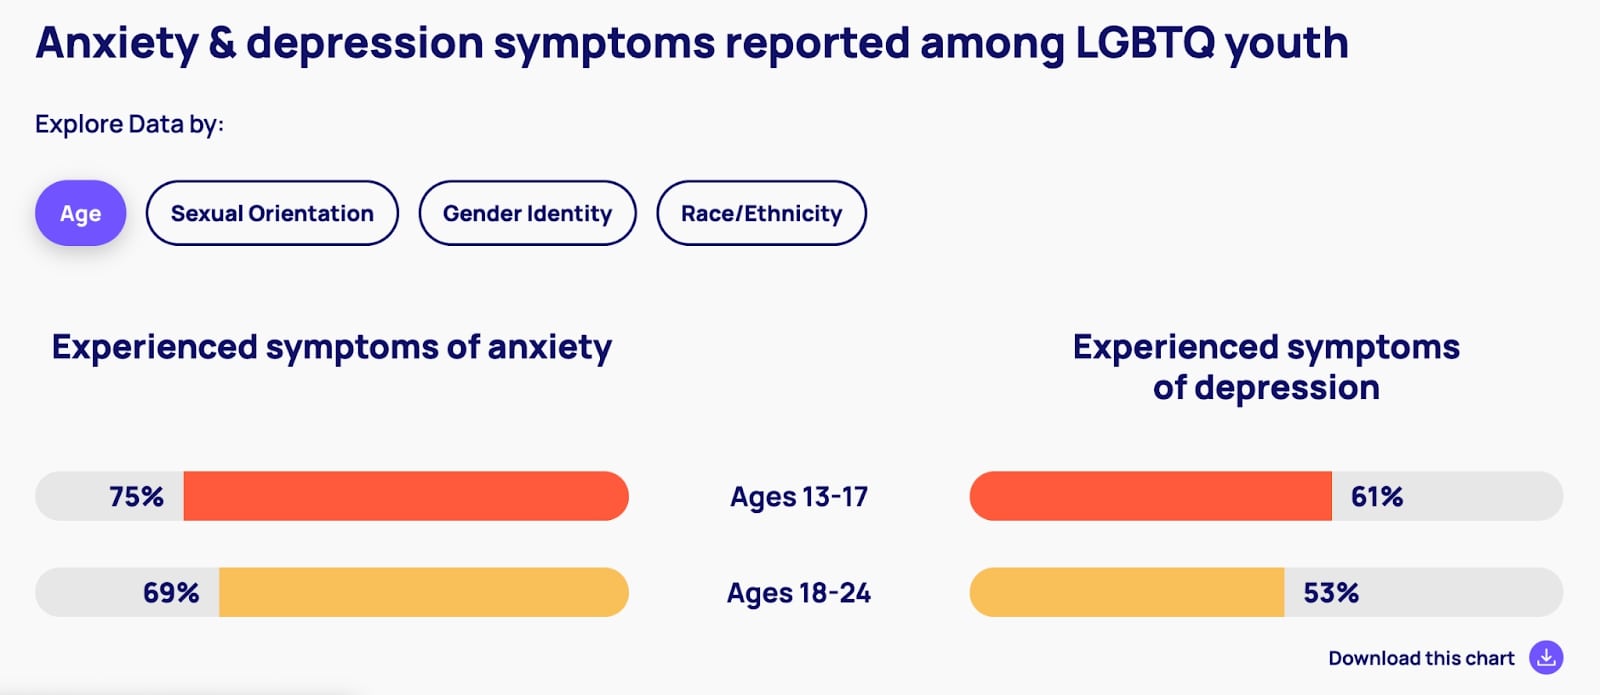 Anixety and depression symptoms reported among LGBTQ youth